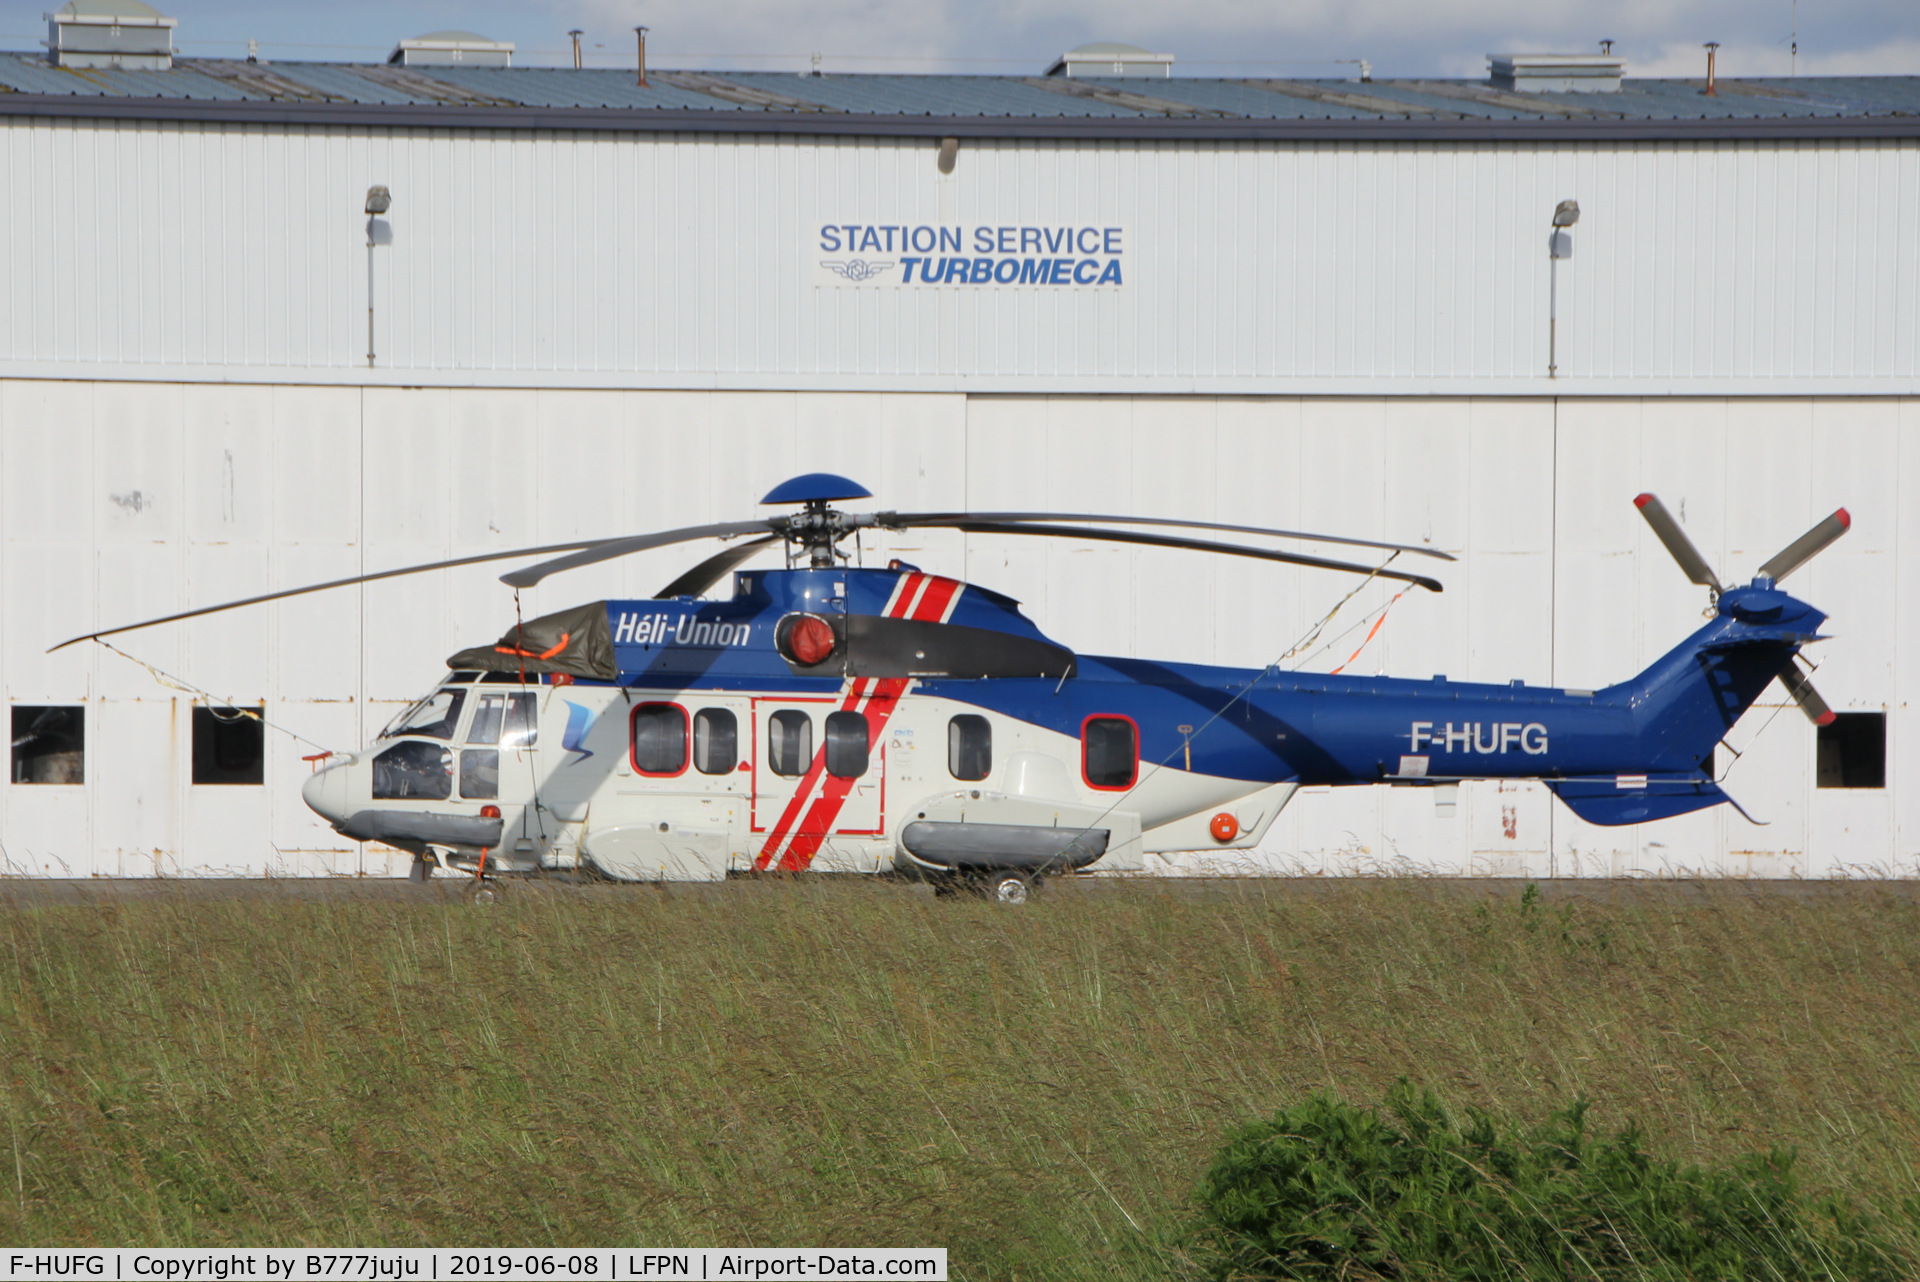 F-HUFG, Airbus Helicopters EC-225LP Super Puma Mk2+ C/N 2932, at Toussus